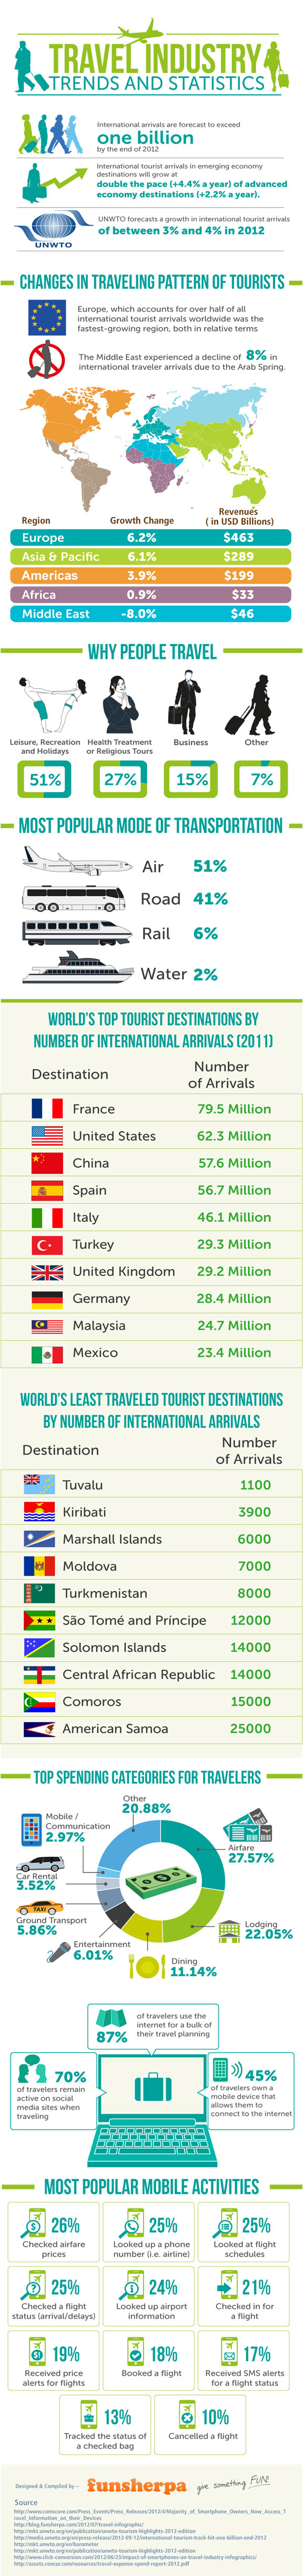 Travel industry trends and statistics